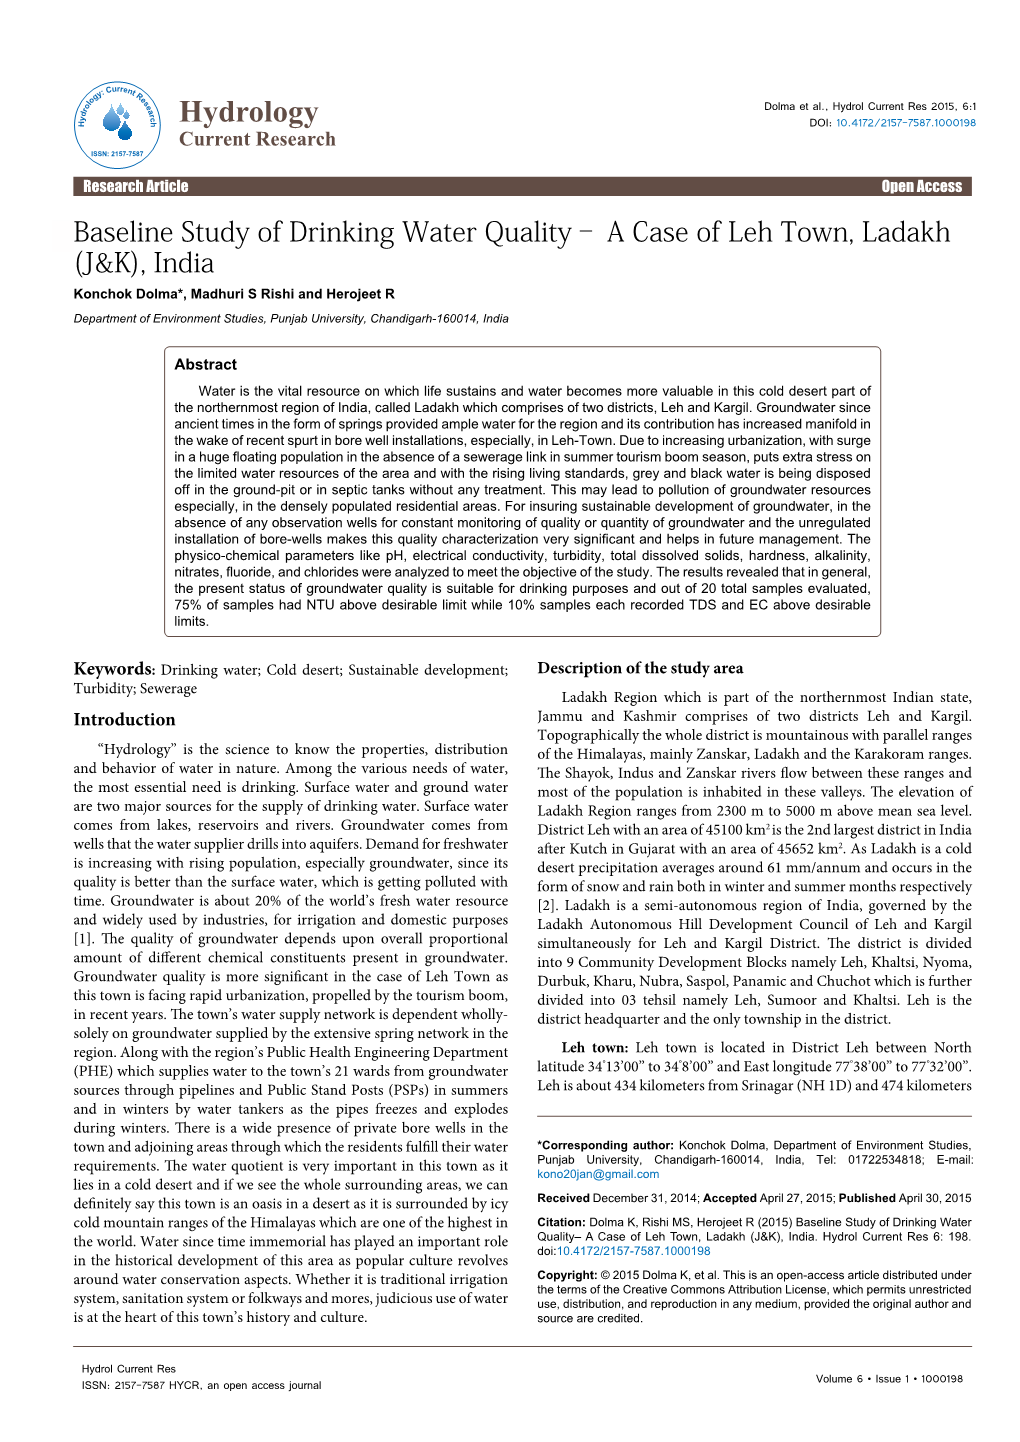 Baseline Study of Drinking Water Quality